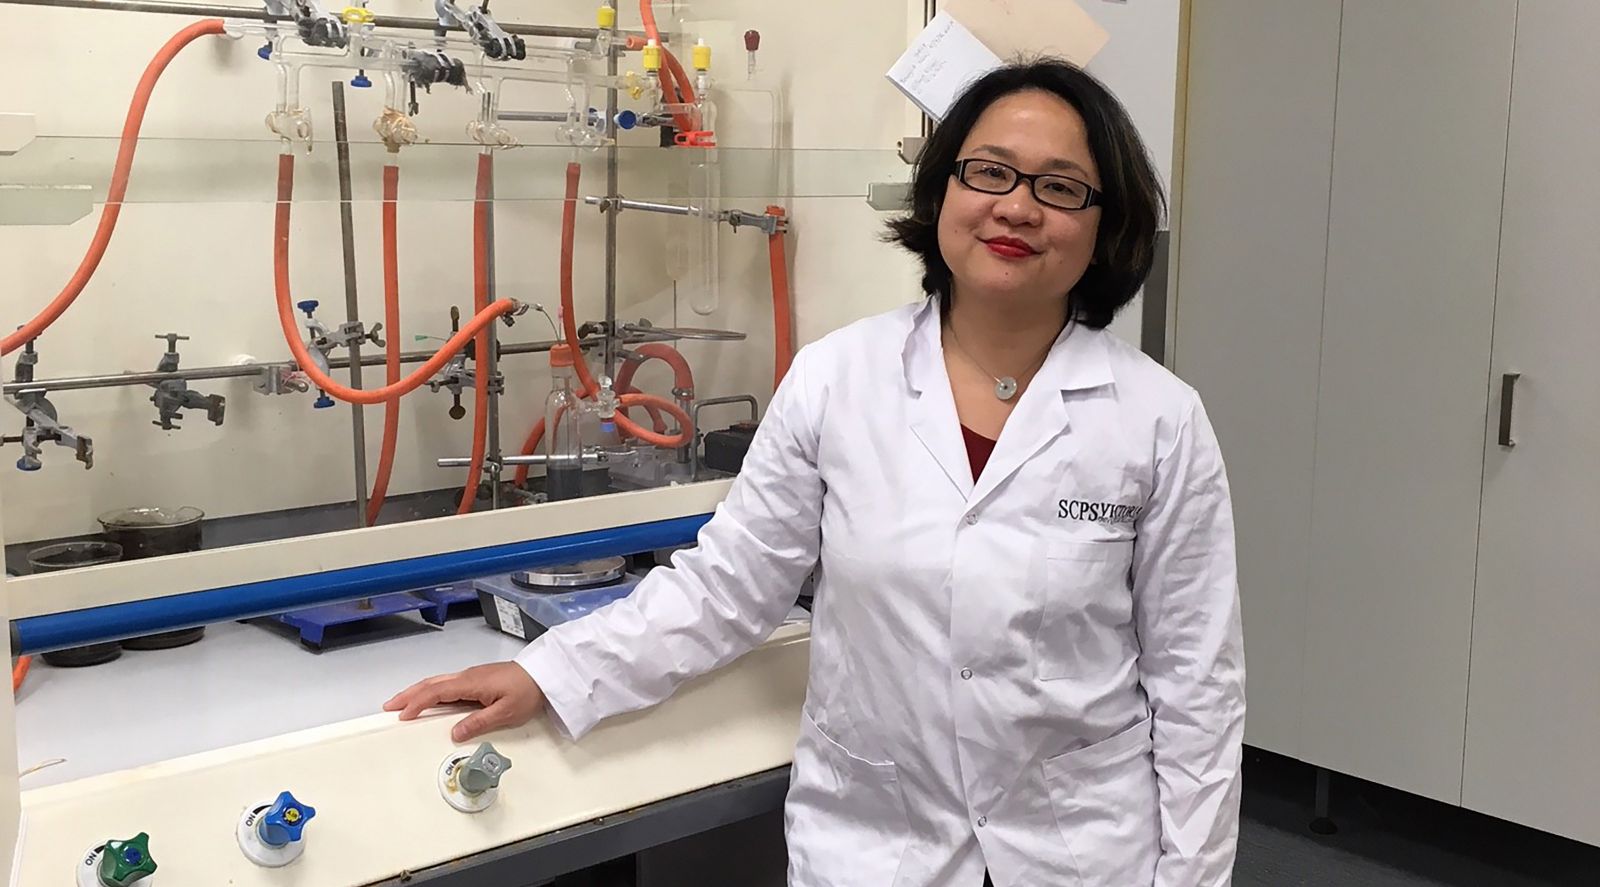 Putri, wearing a lab coat, stands next to chemistry equipment.